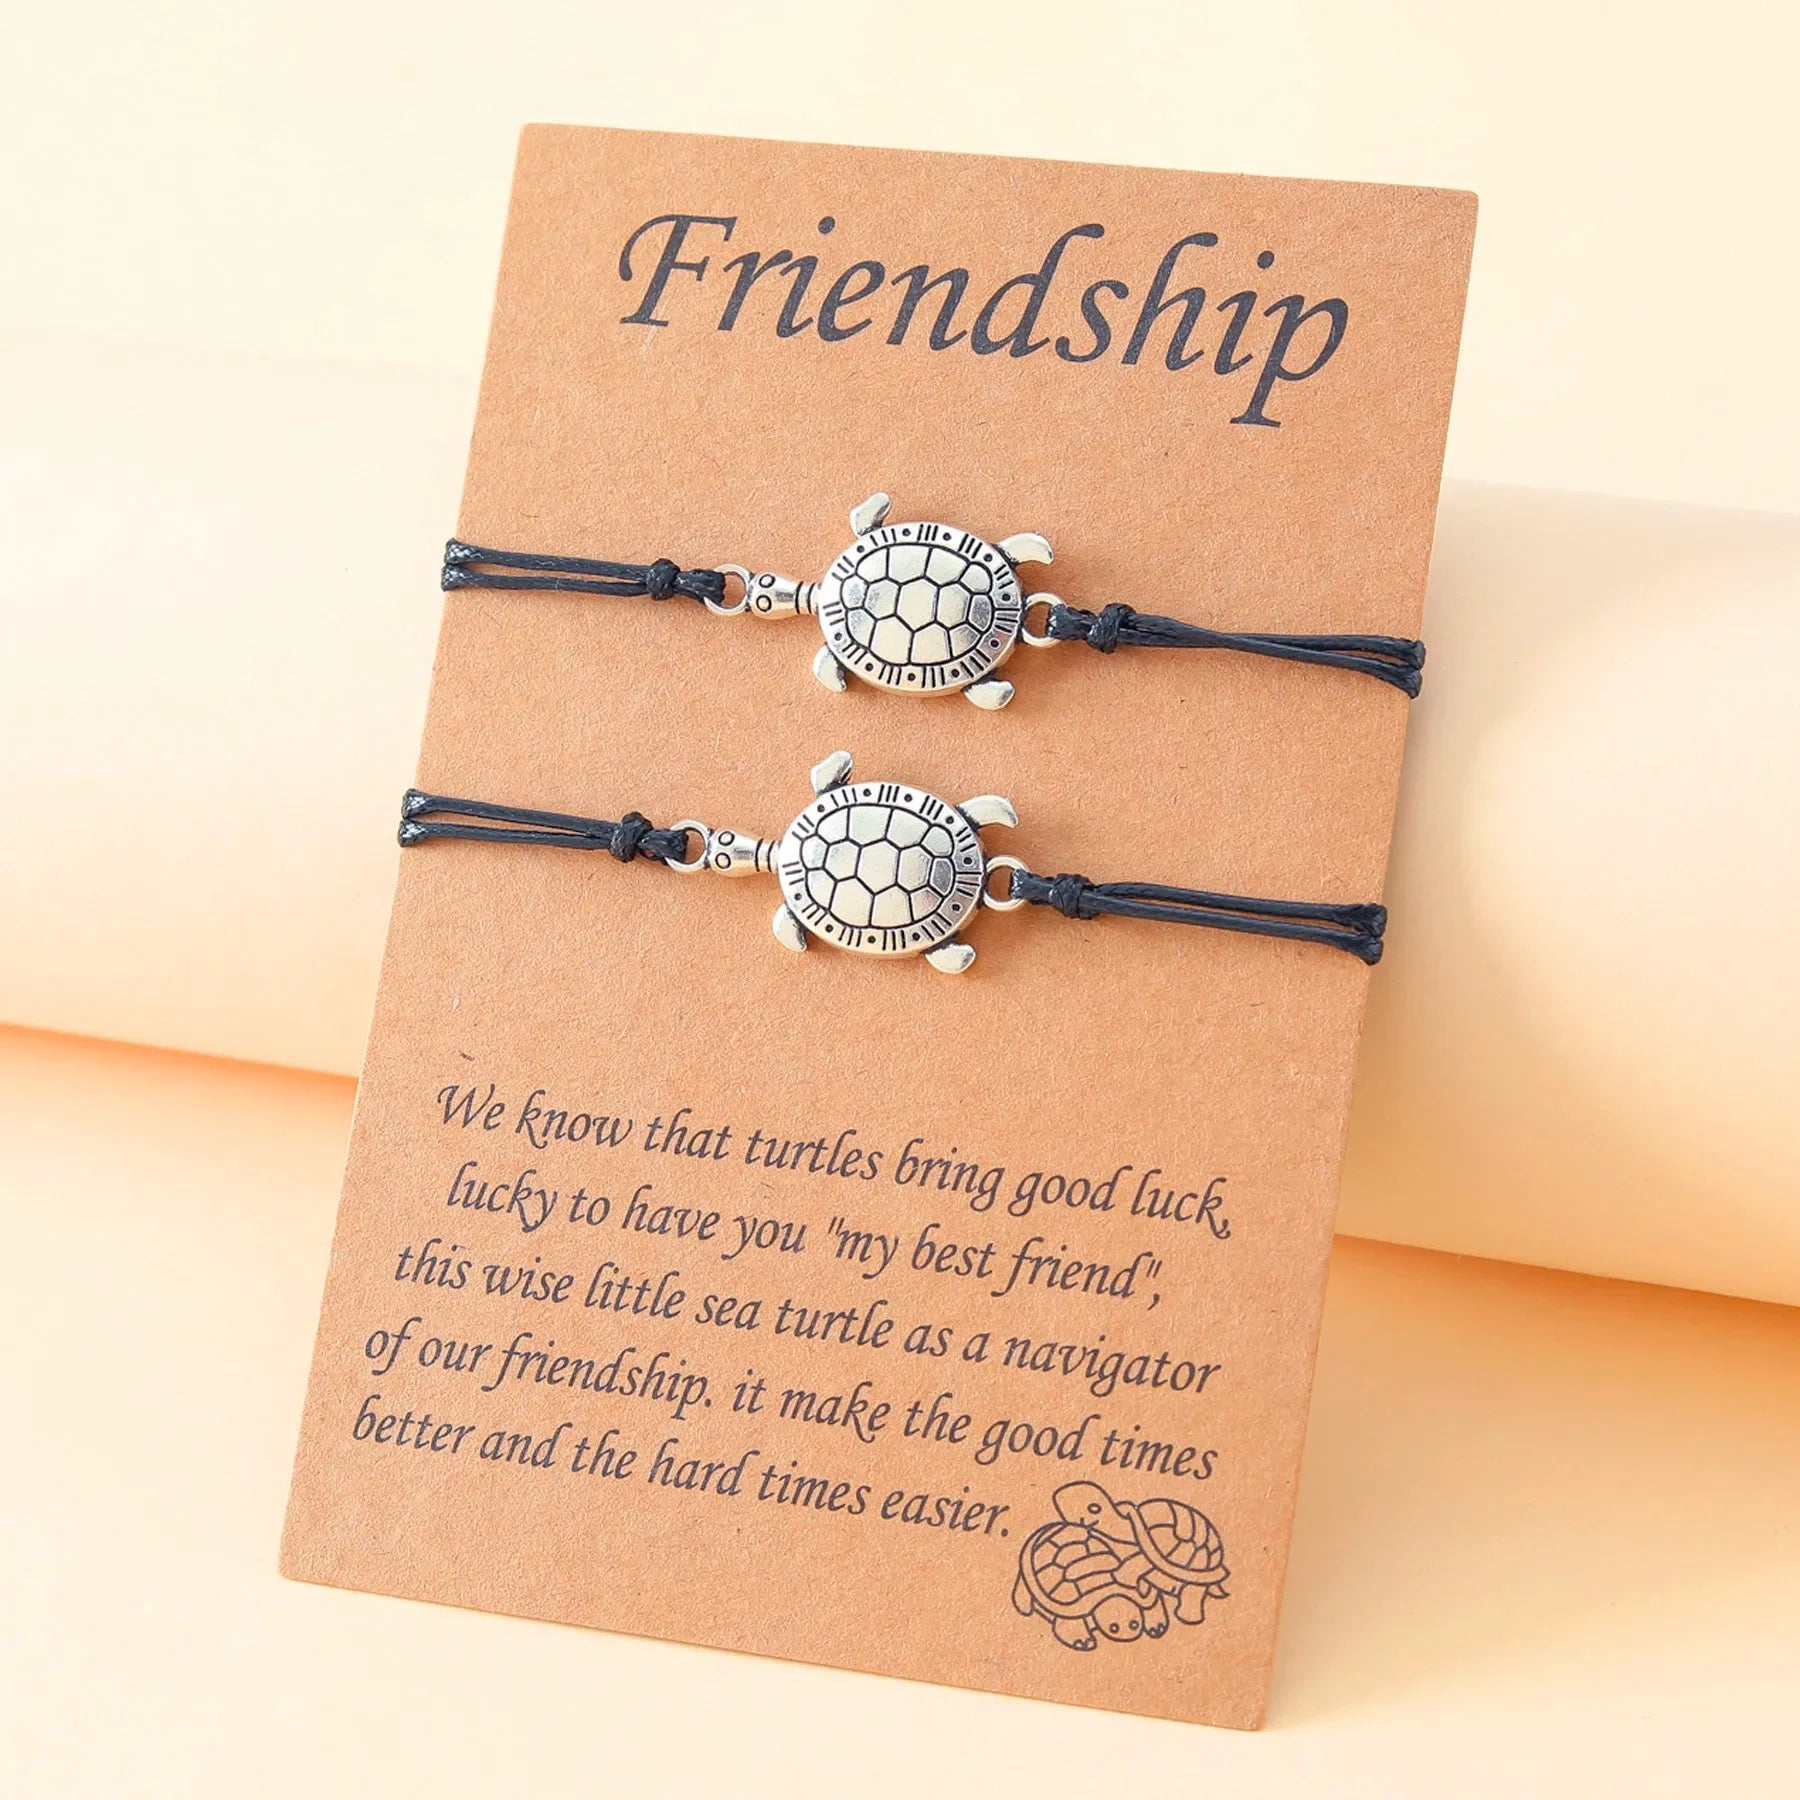 Personalized Sea Turtle Handwoven Bracelet with Friendship Card